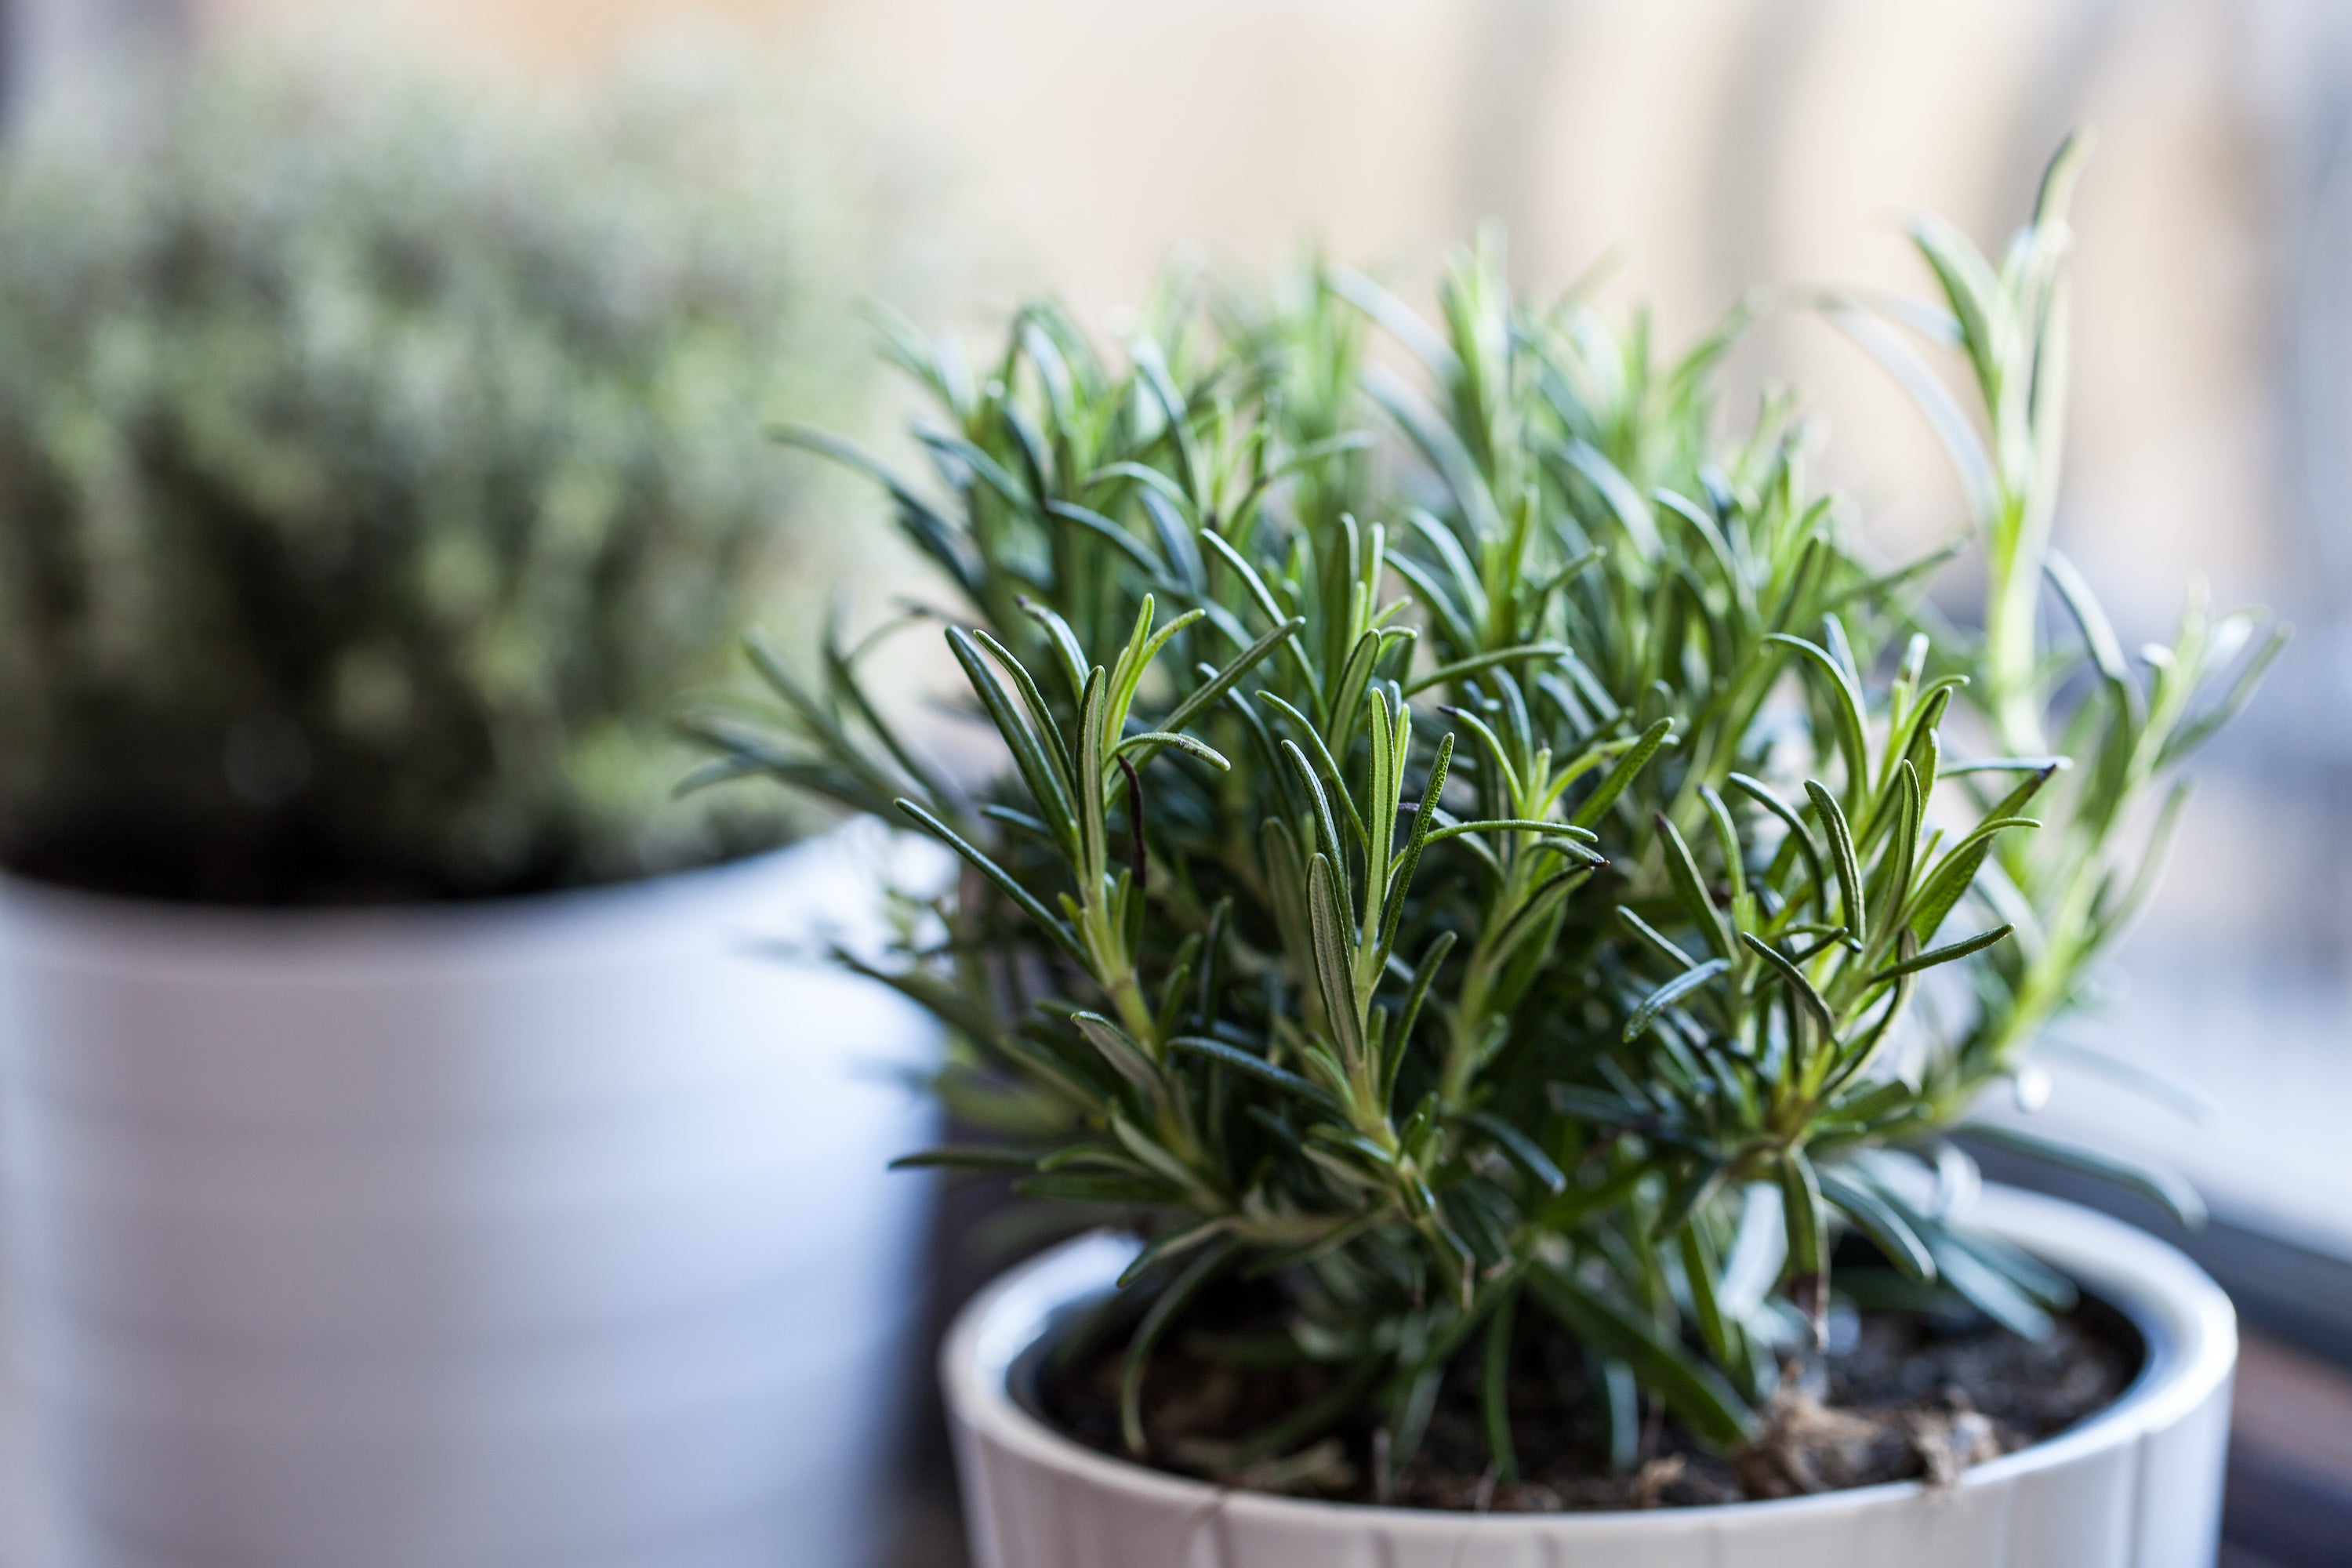 rosemary growing in small pot